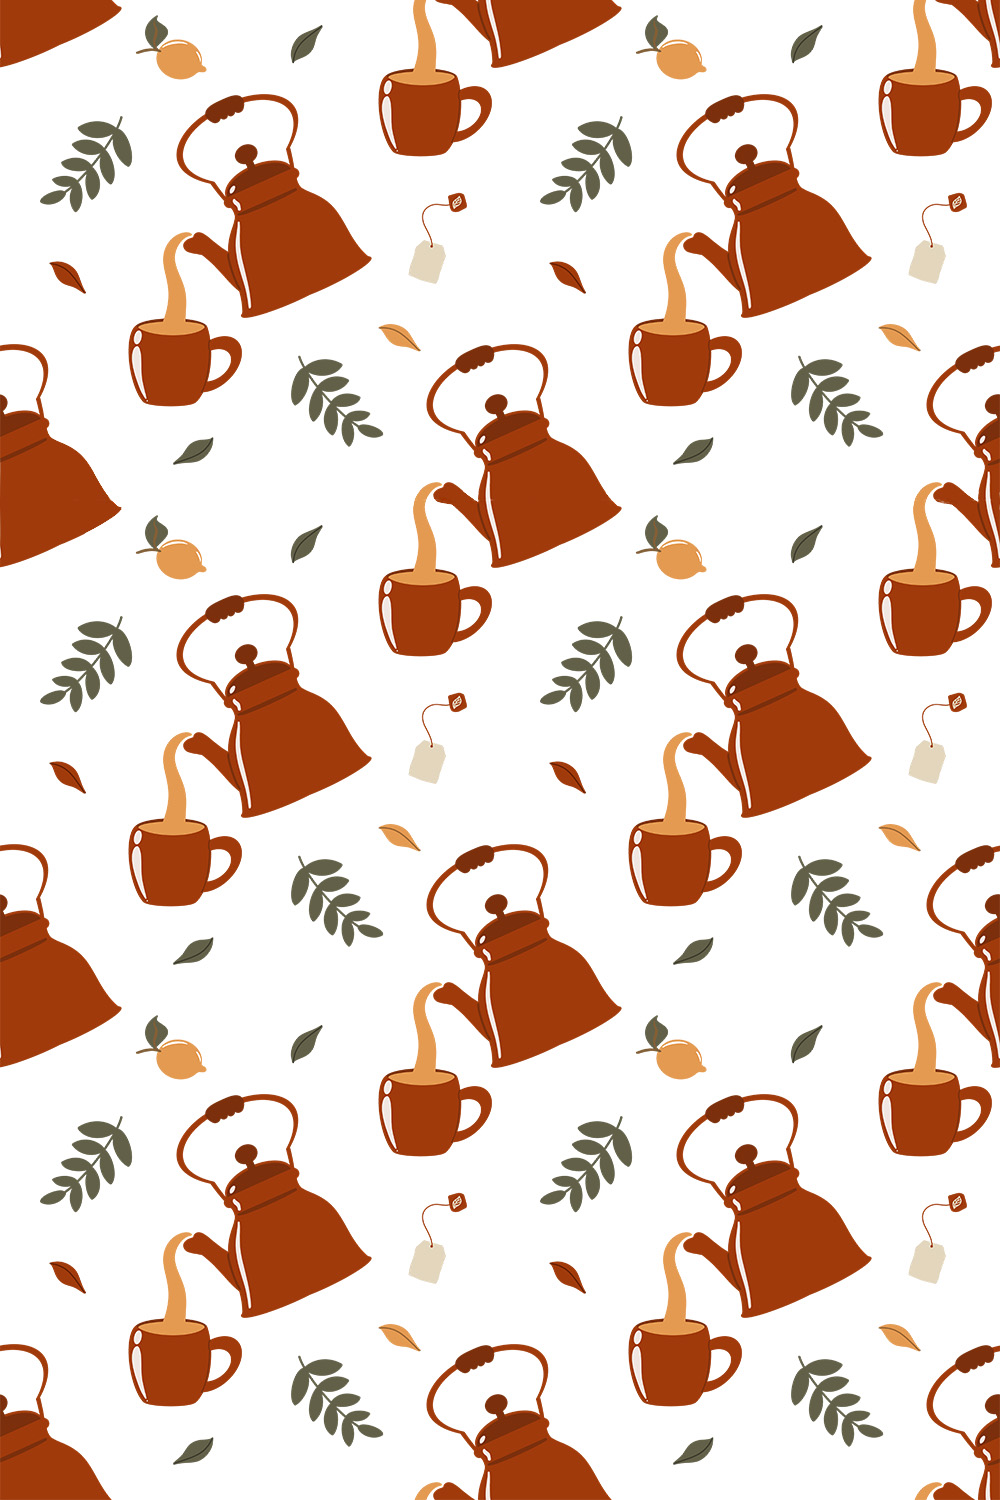 Fall Seamless Patterns with Leaves and Pumpkin Pinterest image.